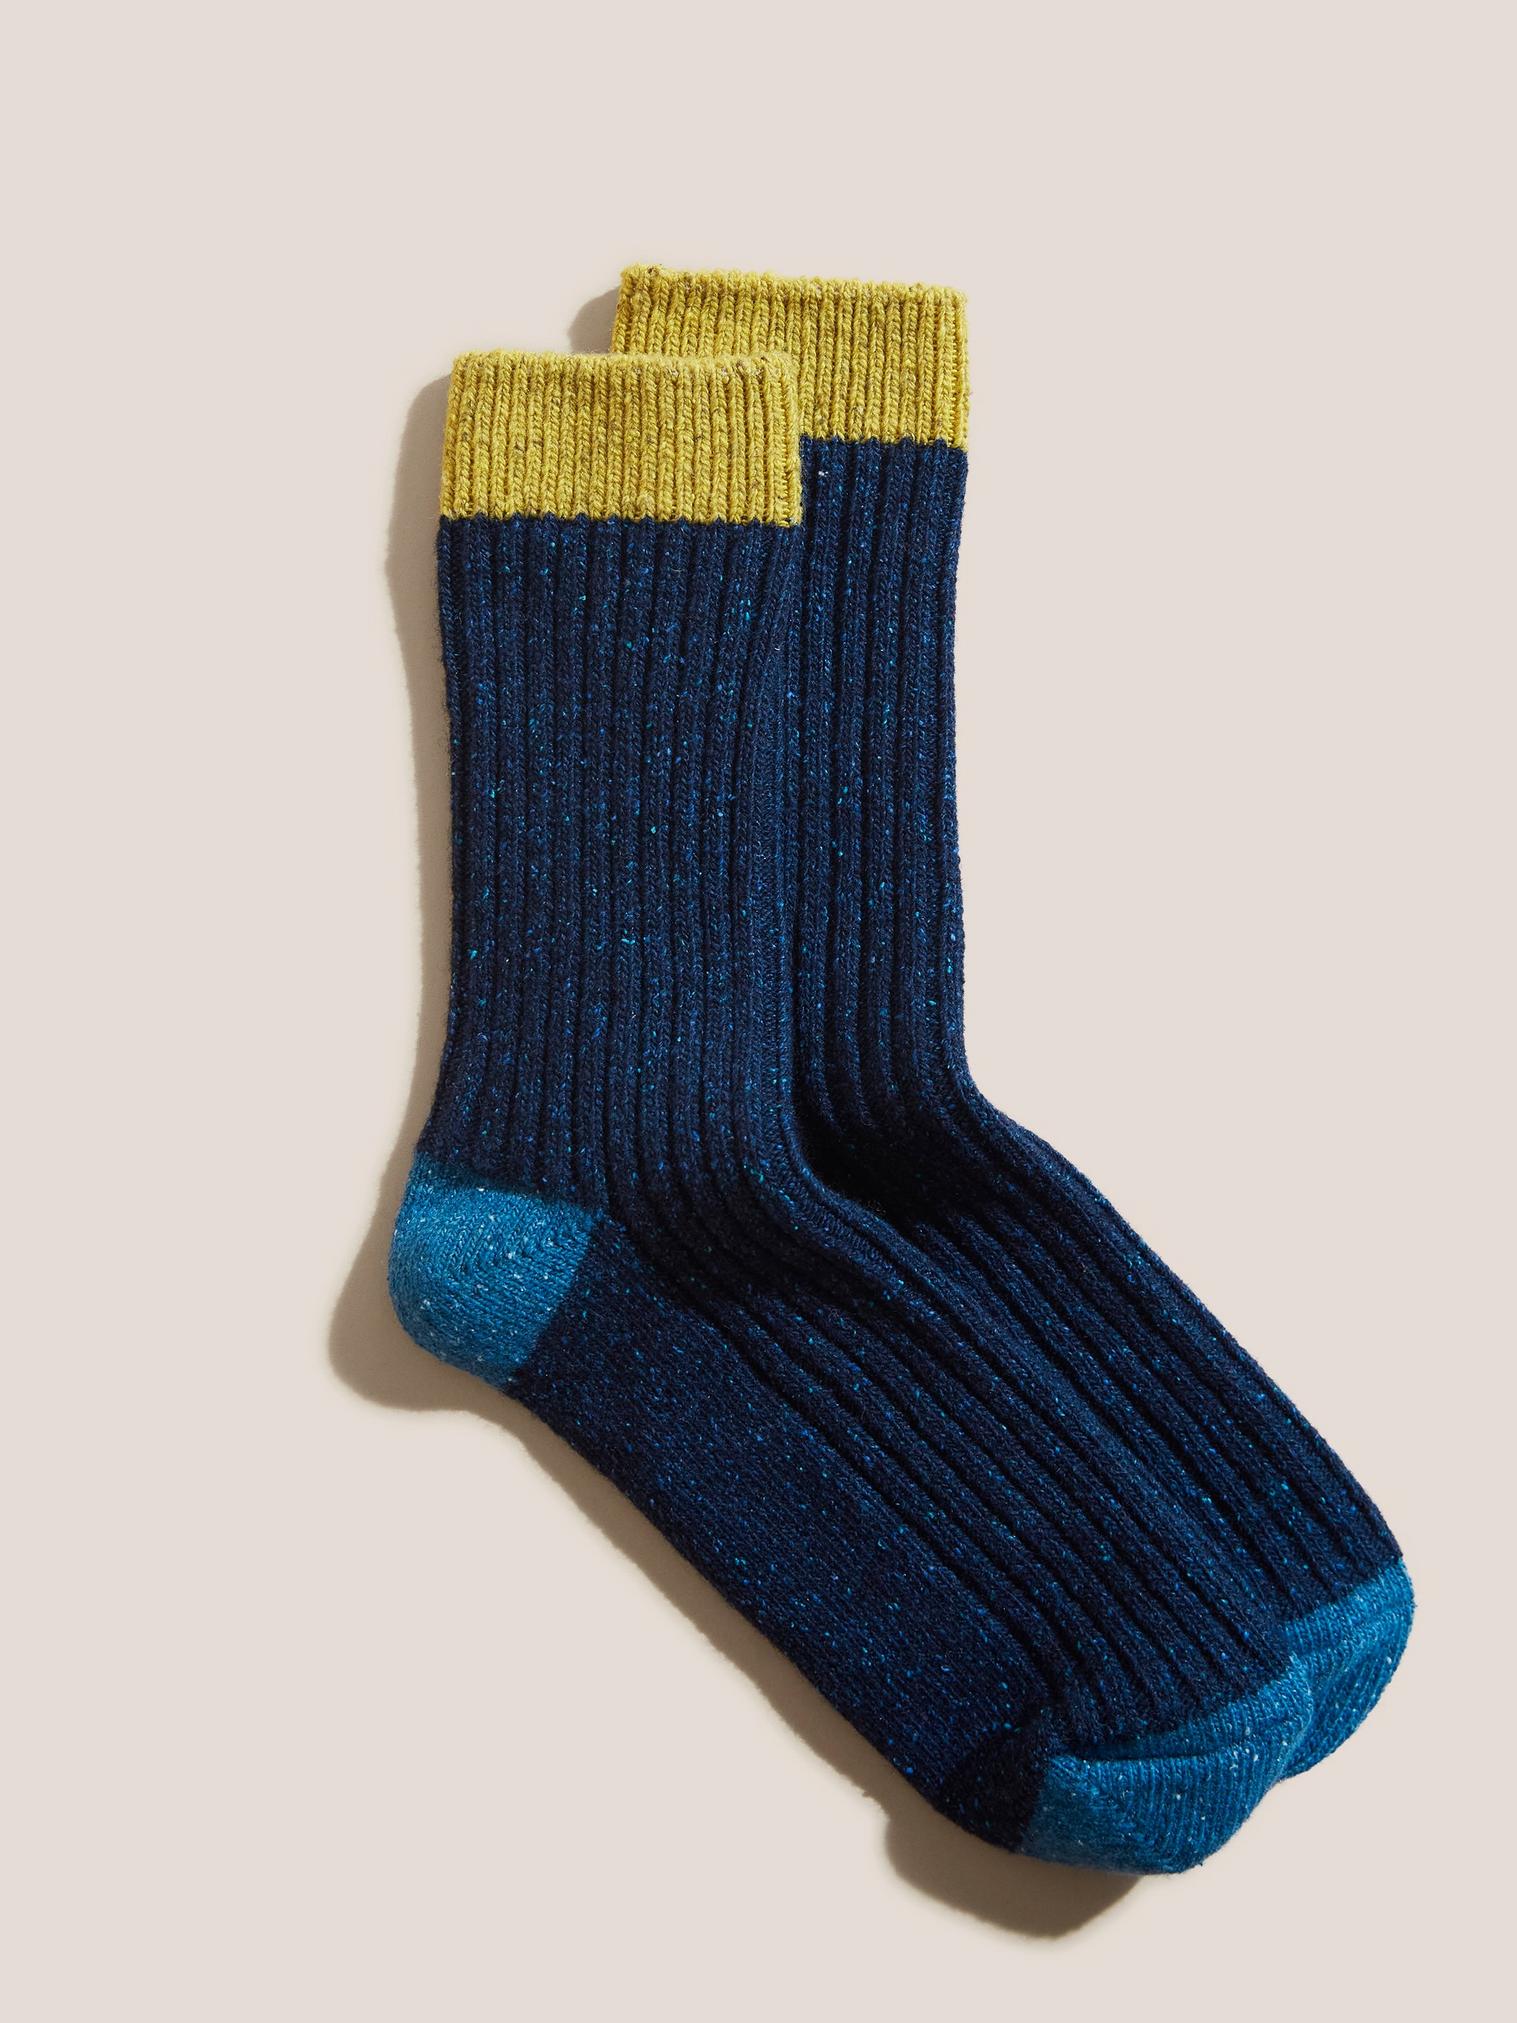 Nep Boot Socks in MID TEAL - FLAT FRONT